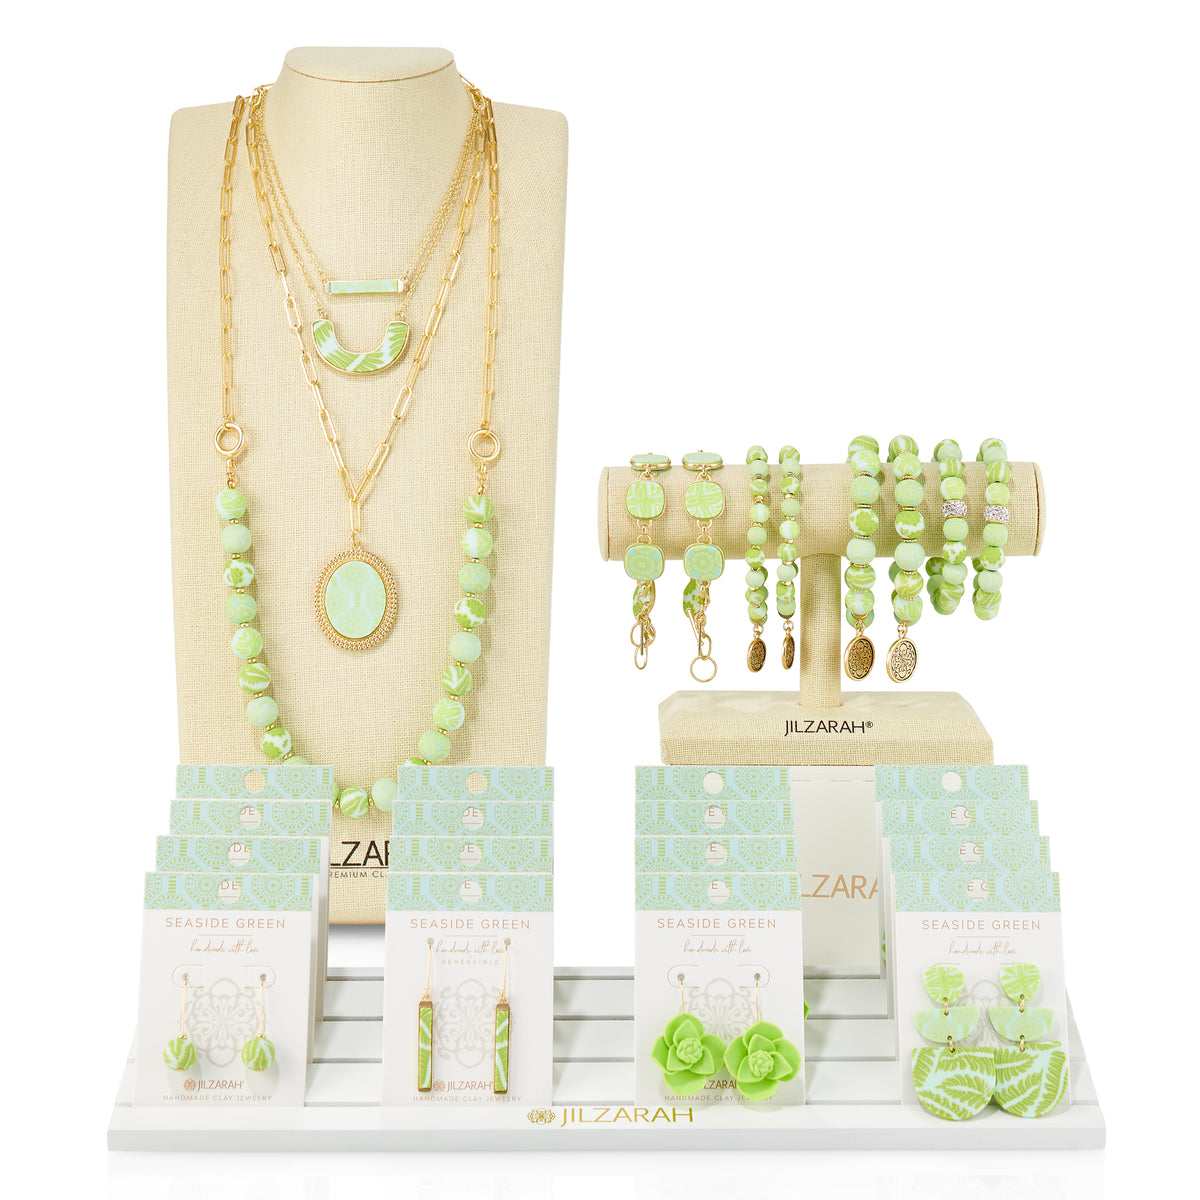 Seaside Green Collection